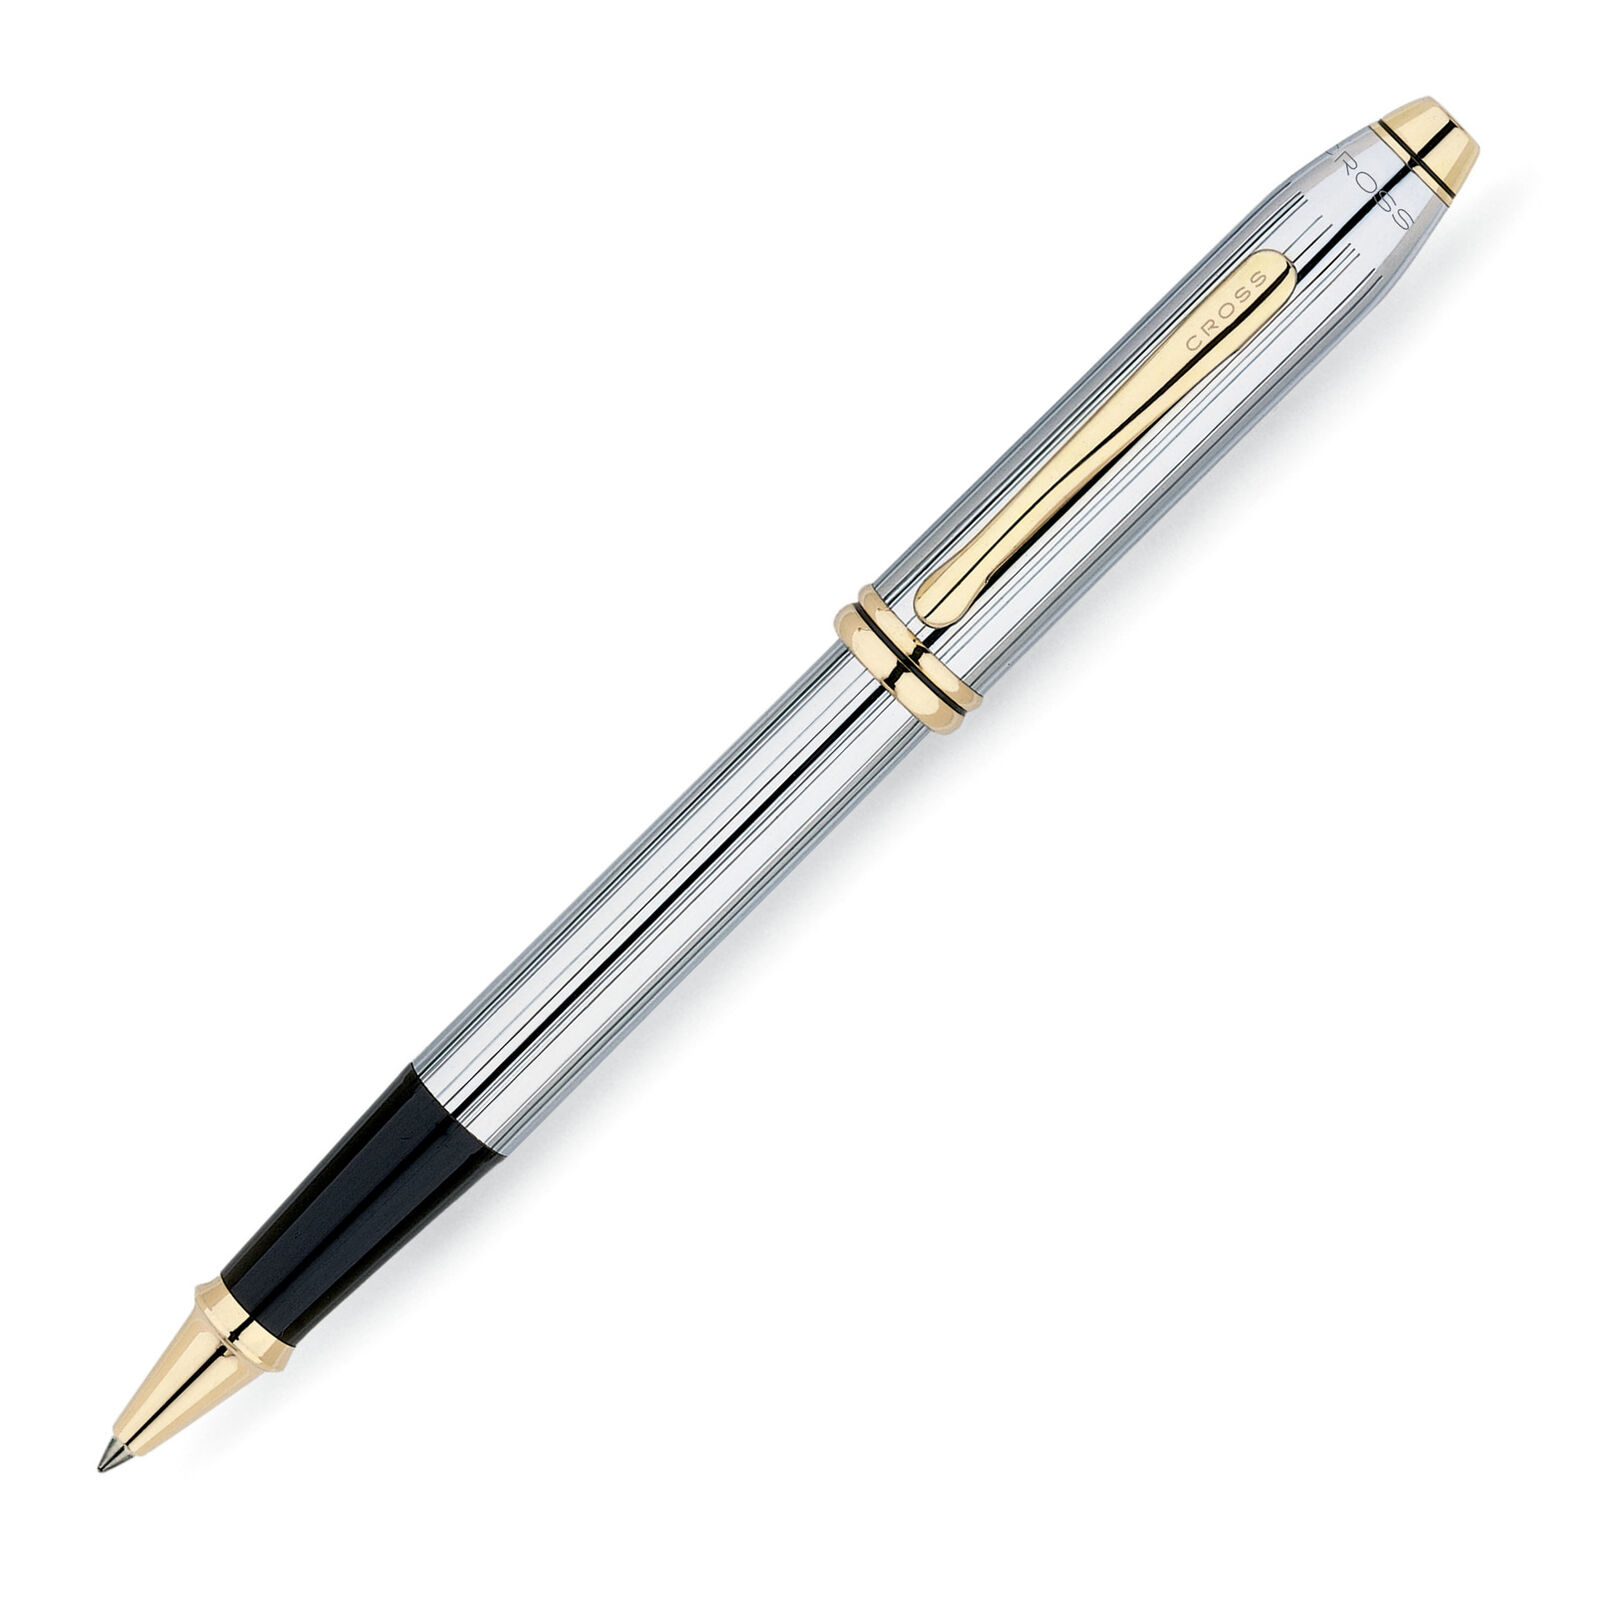 Cross Townsend Rollerball Pen in Medalist Chrome with 24K Gold Trim - NEW